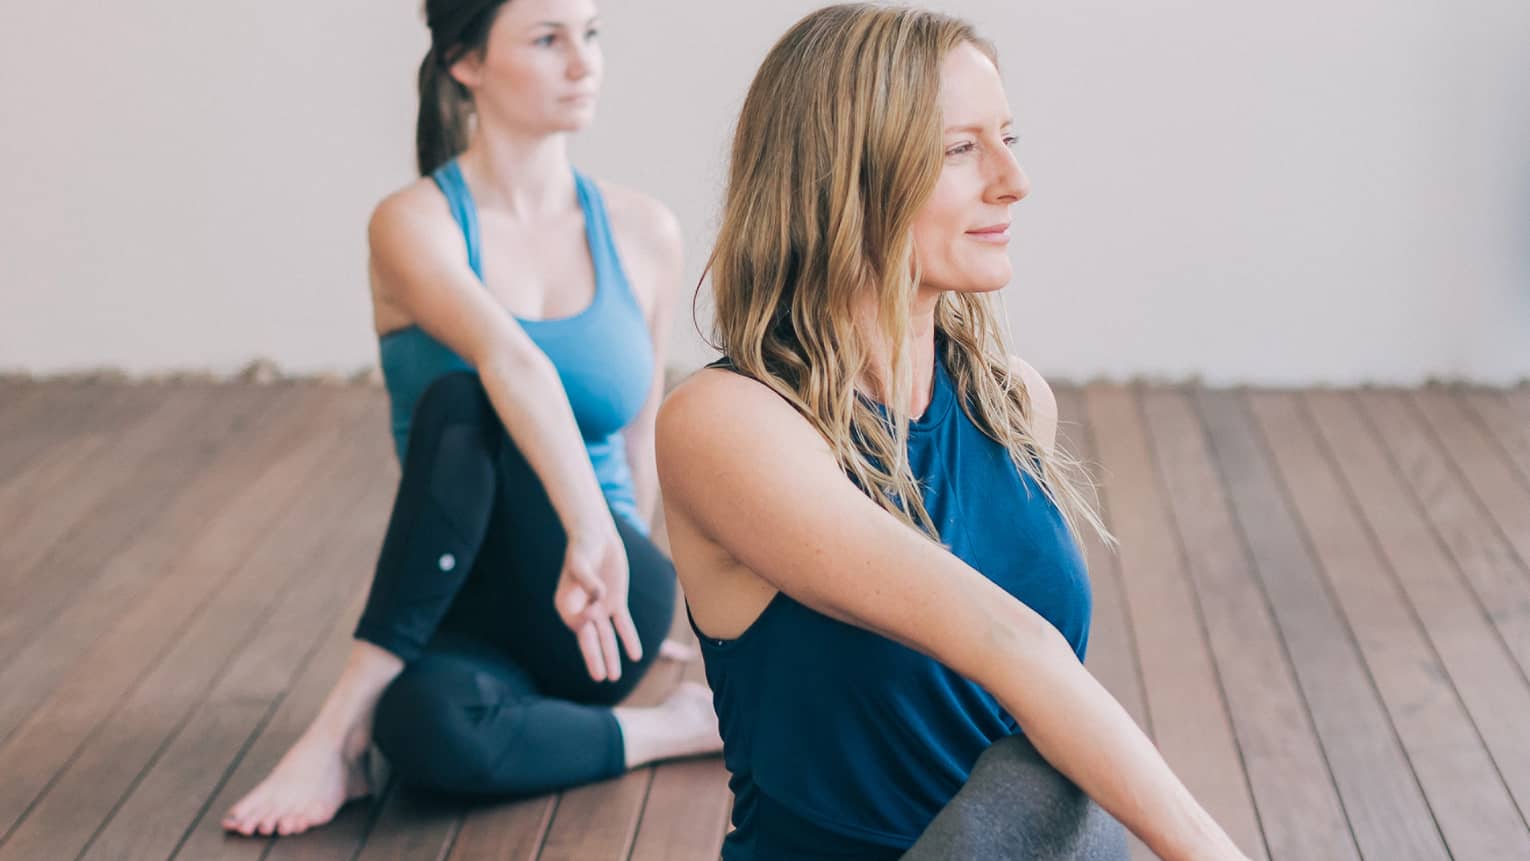 One blonde woman and one brunette woman sit with one leg crossed over the other with their bodies turned to one side and their front hands forming a lam mudra